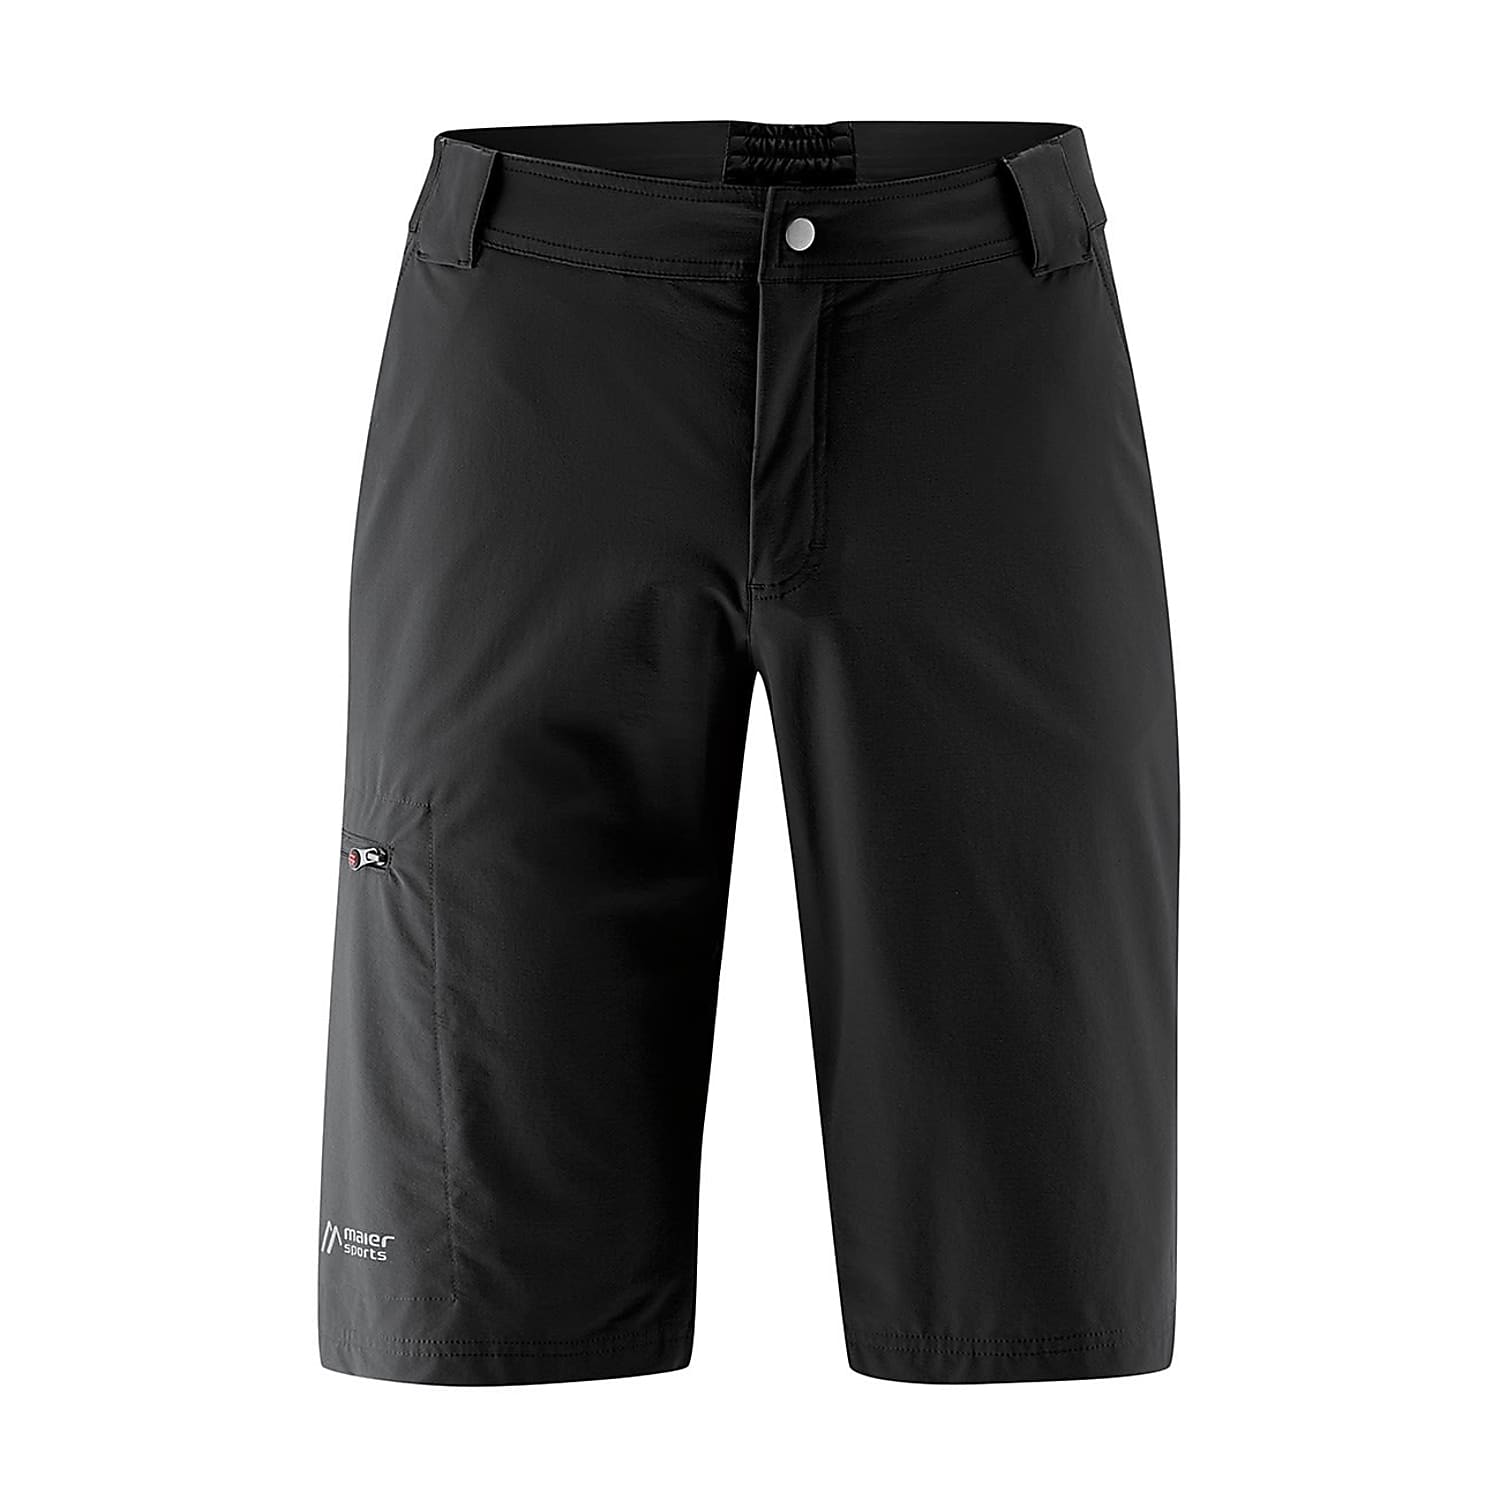 shipping - Black and M cheap Maier Sports Fast NORIT SHORT,